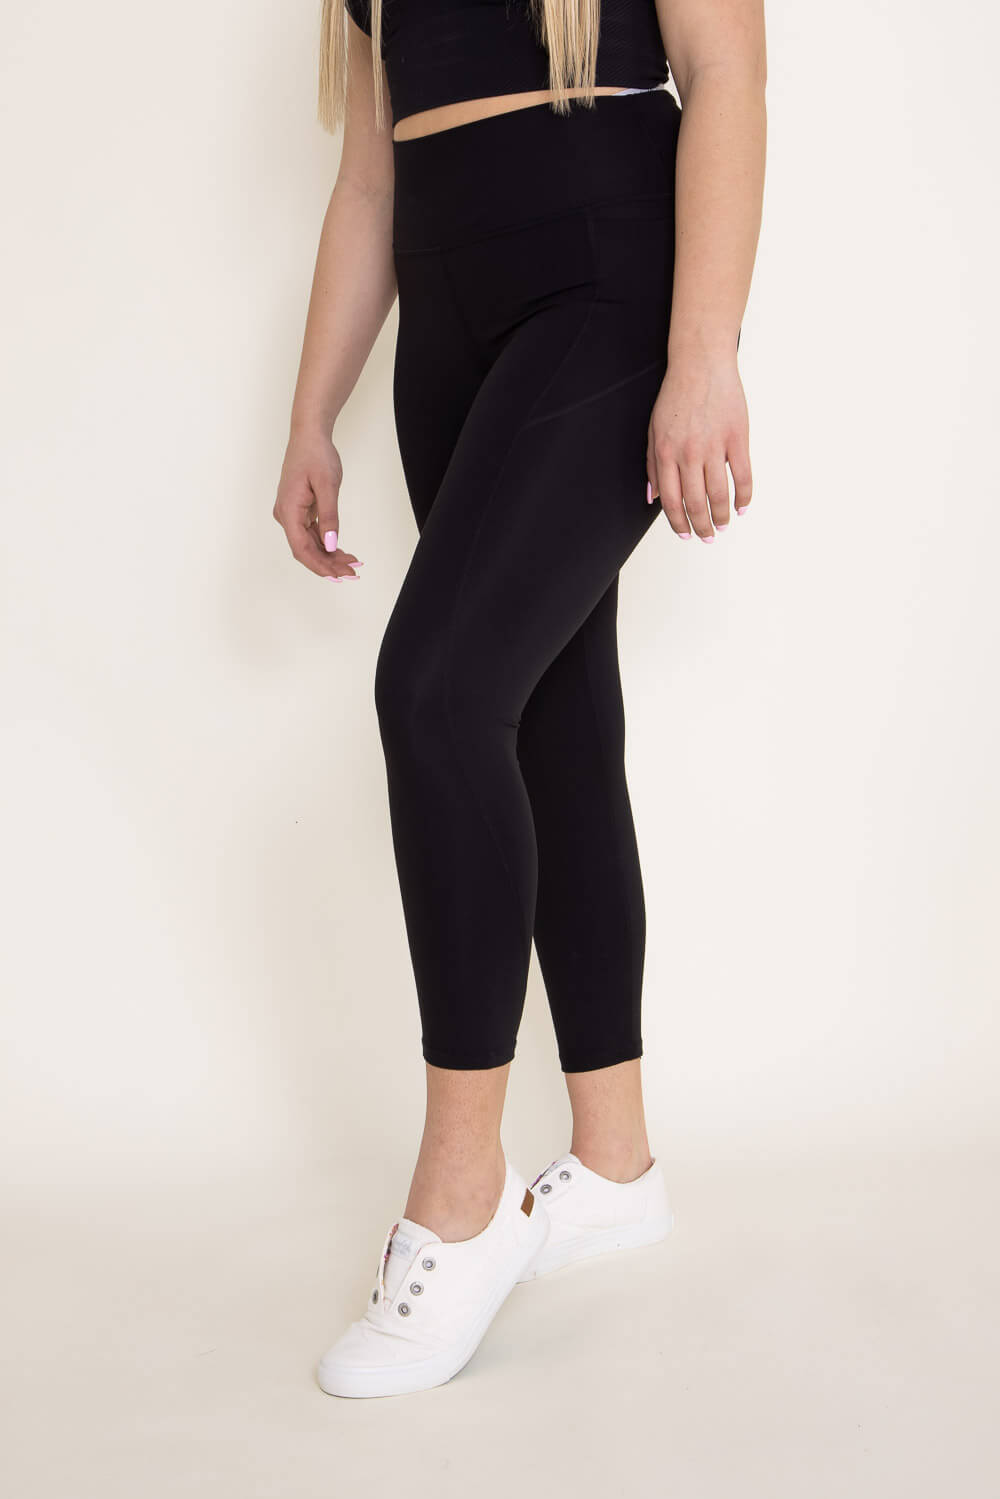 Love Tree Contour Leggings with Pockets for Women in Black